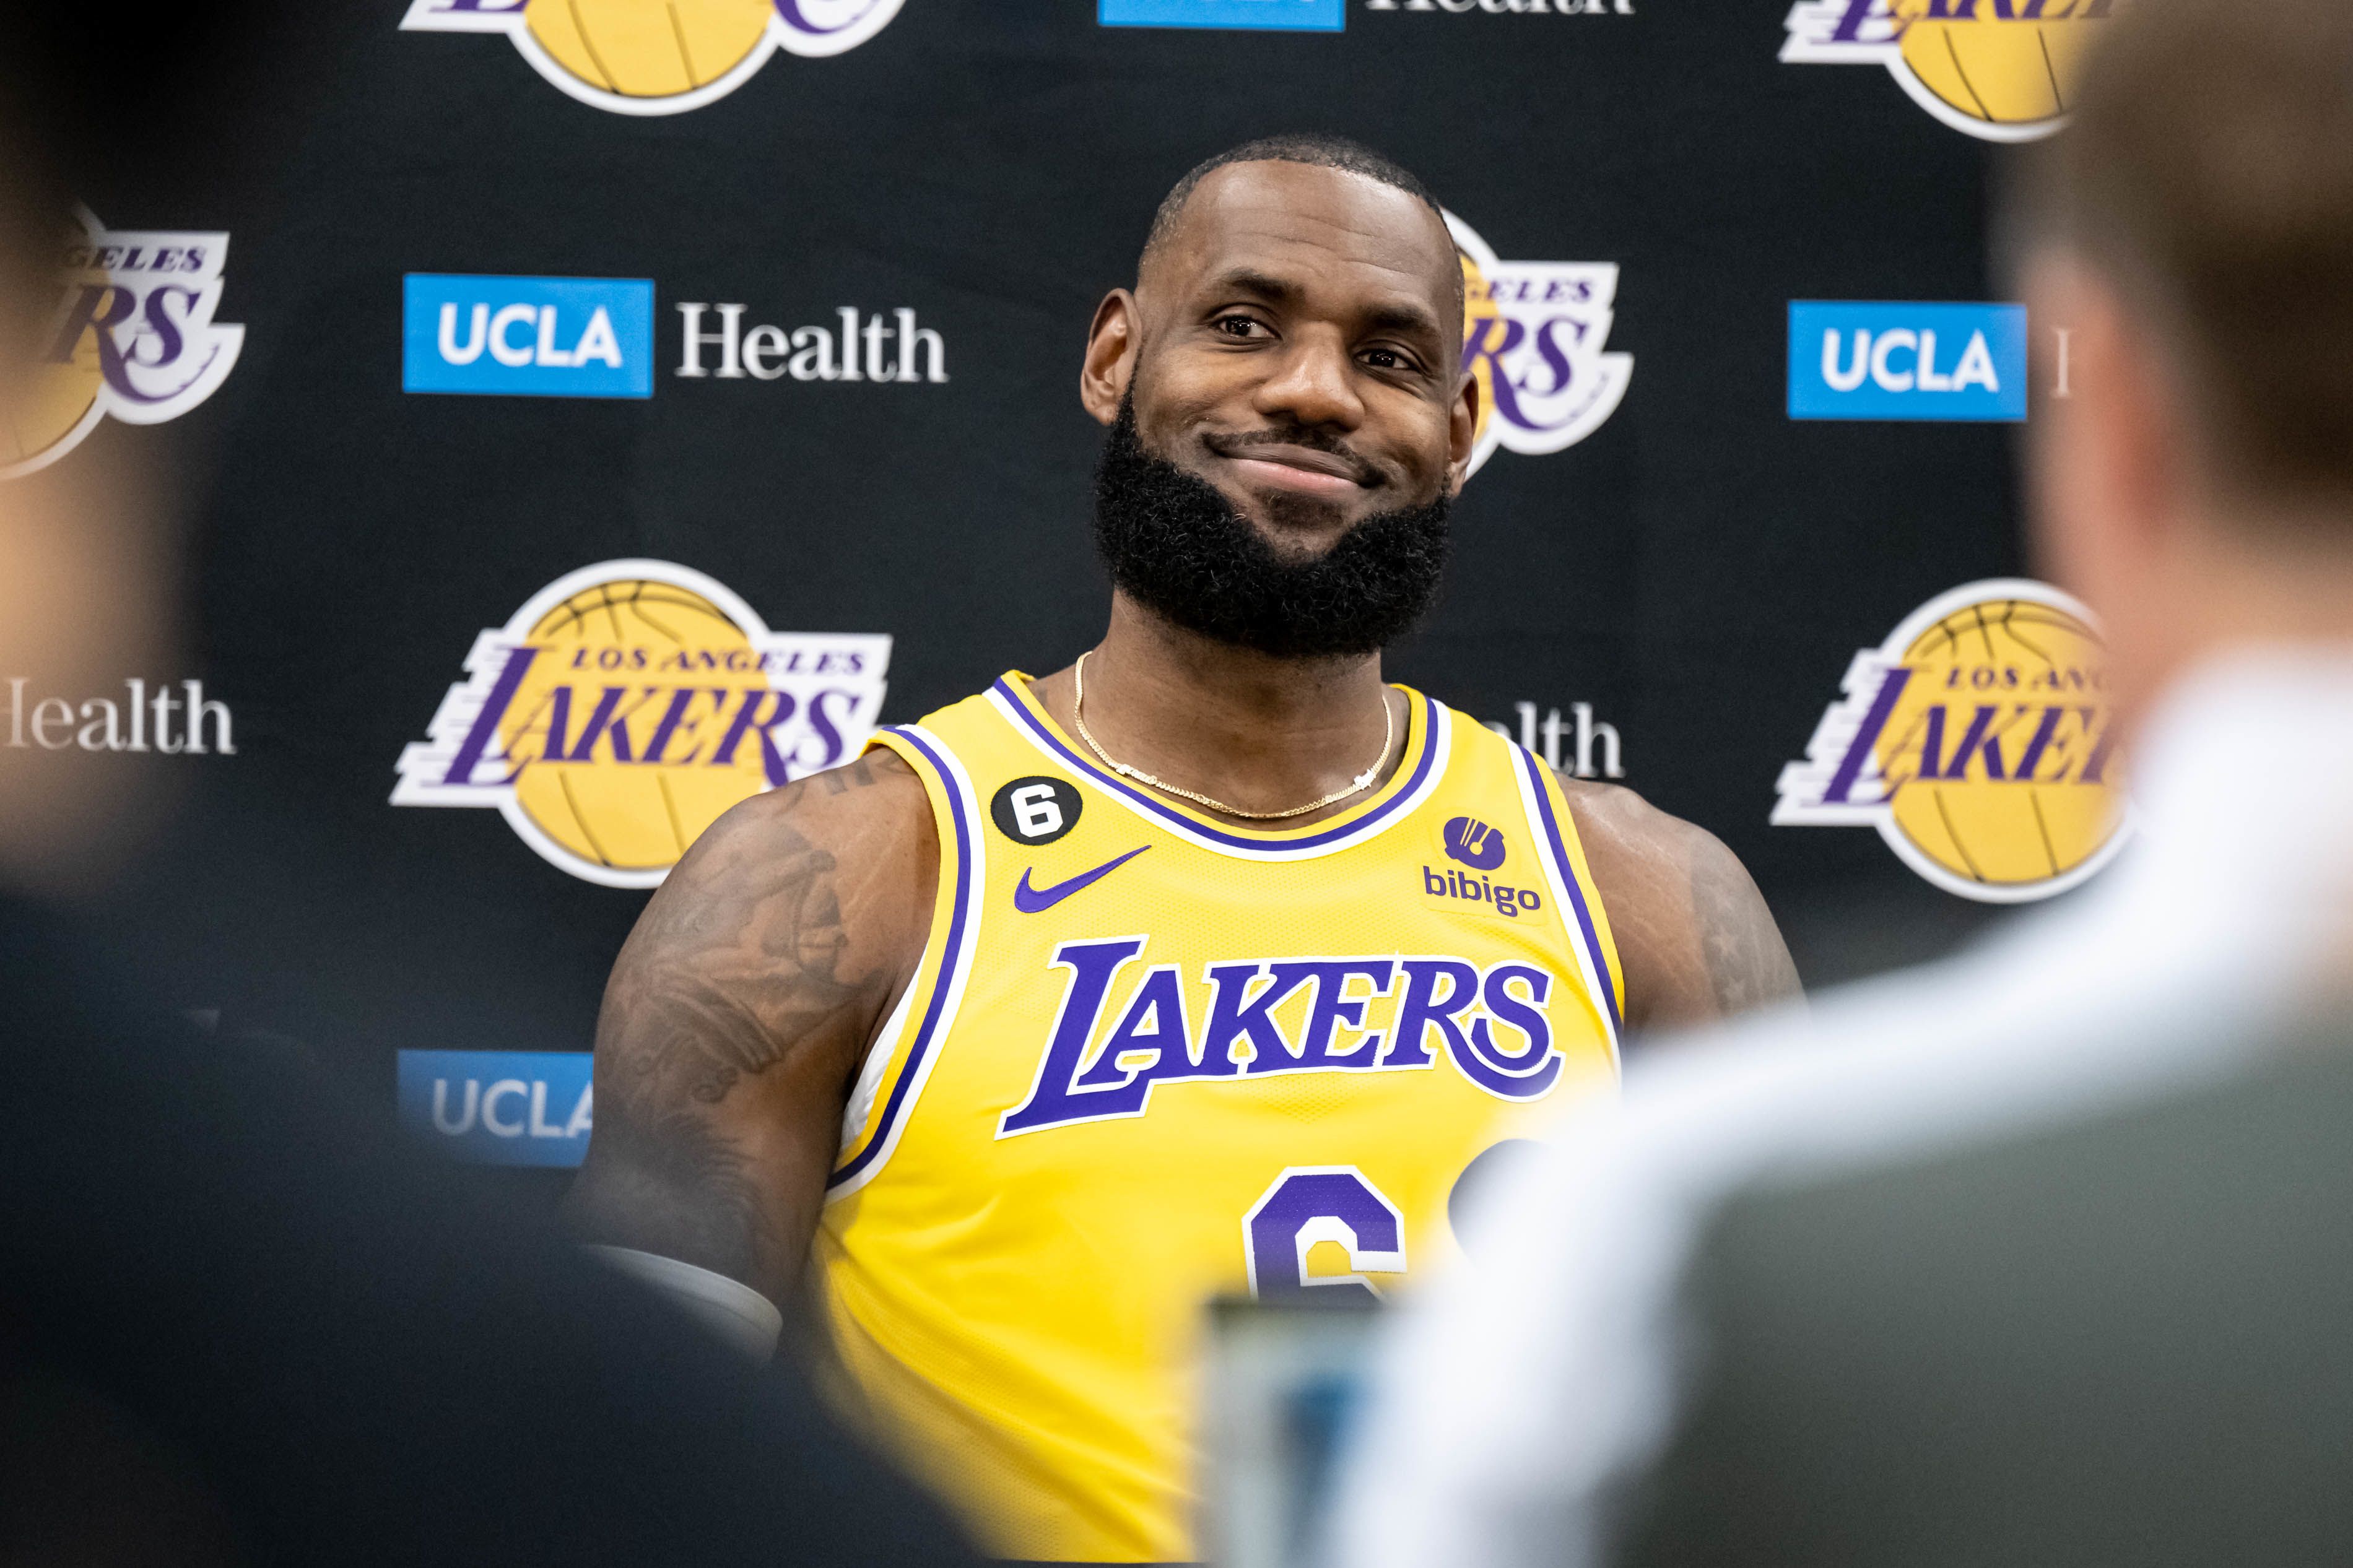 LeBron James makes expansion pitch to Adam Silver for NBA team in